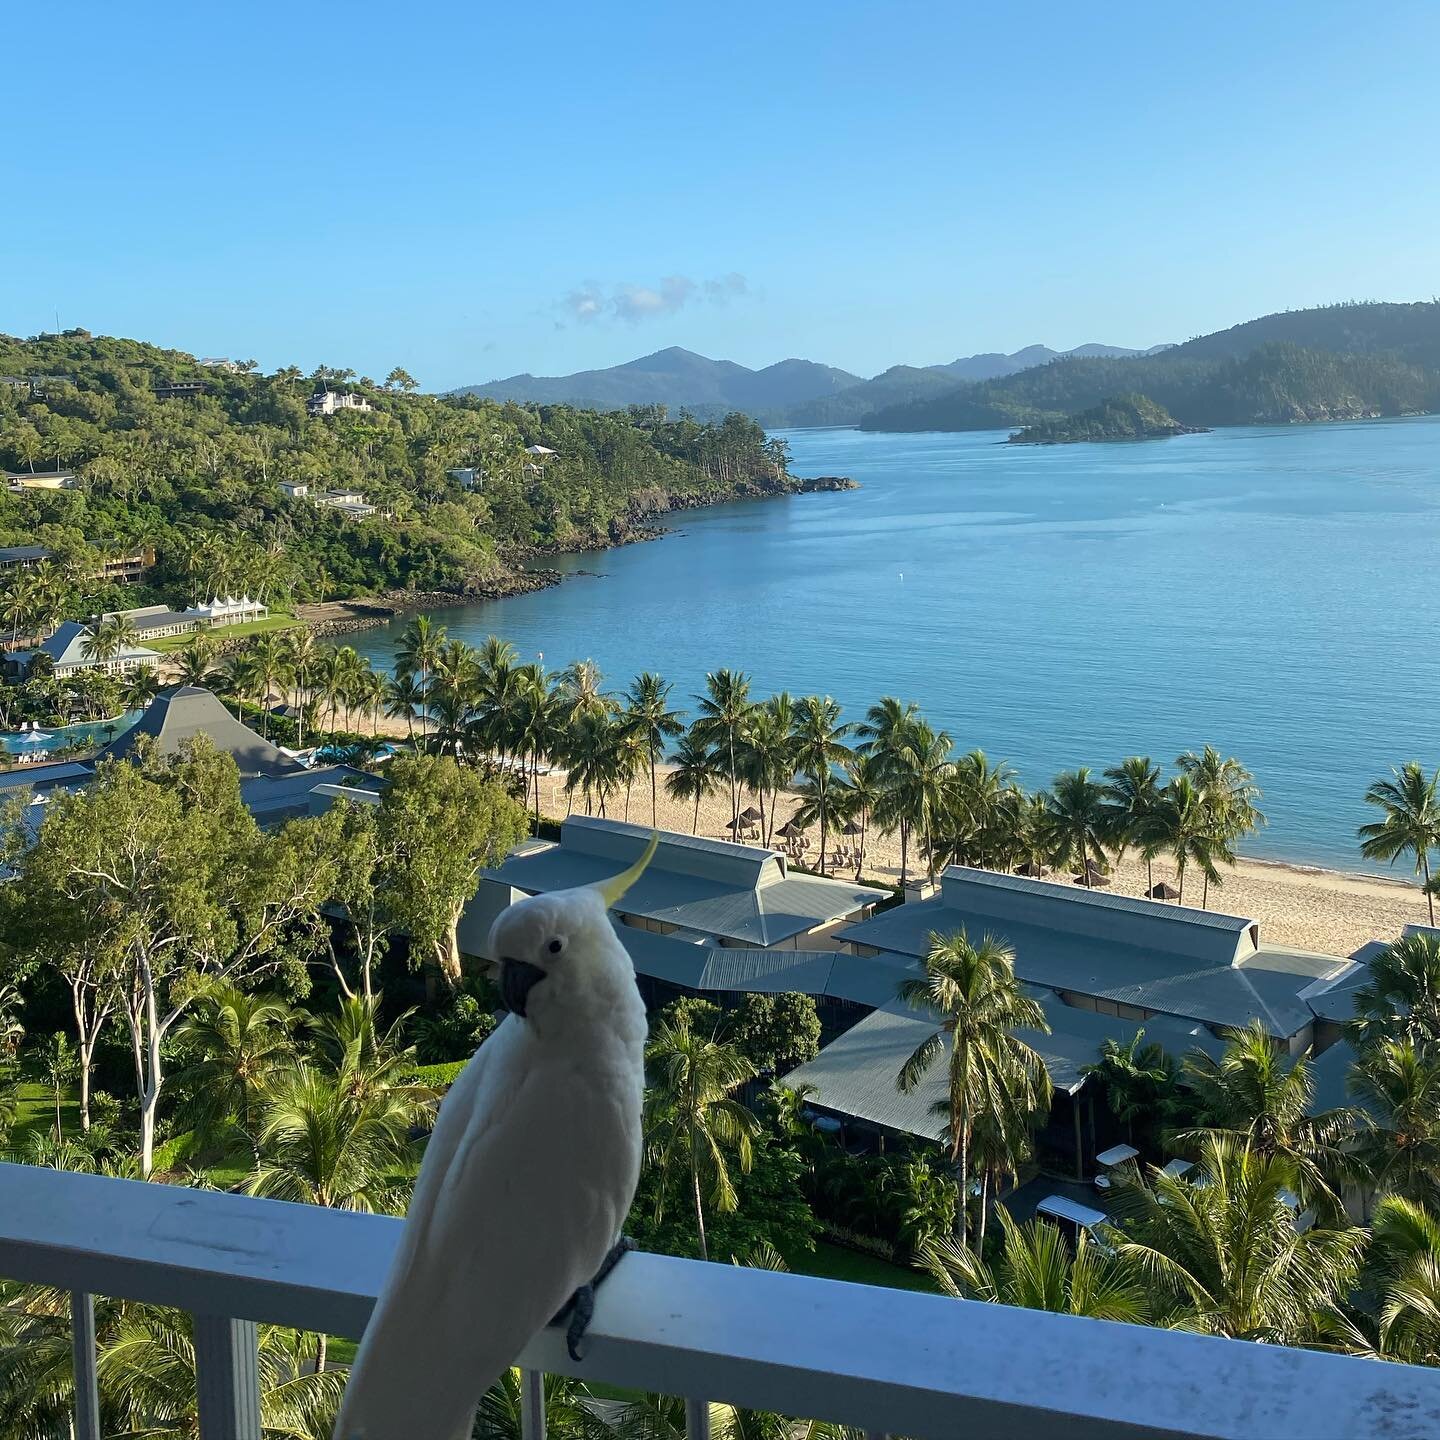 After being confined to home for the past year, it&rsquo;s nice to have the chance to escape for a few days 🌴☀️✈️

#hamiltonisland #queensland #familyholiday #whitehavenbeach #grateful